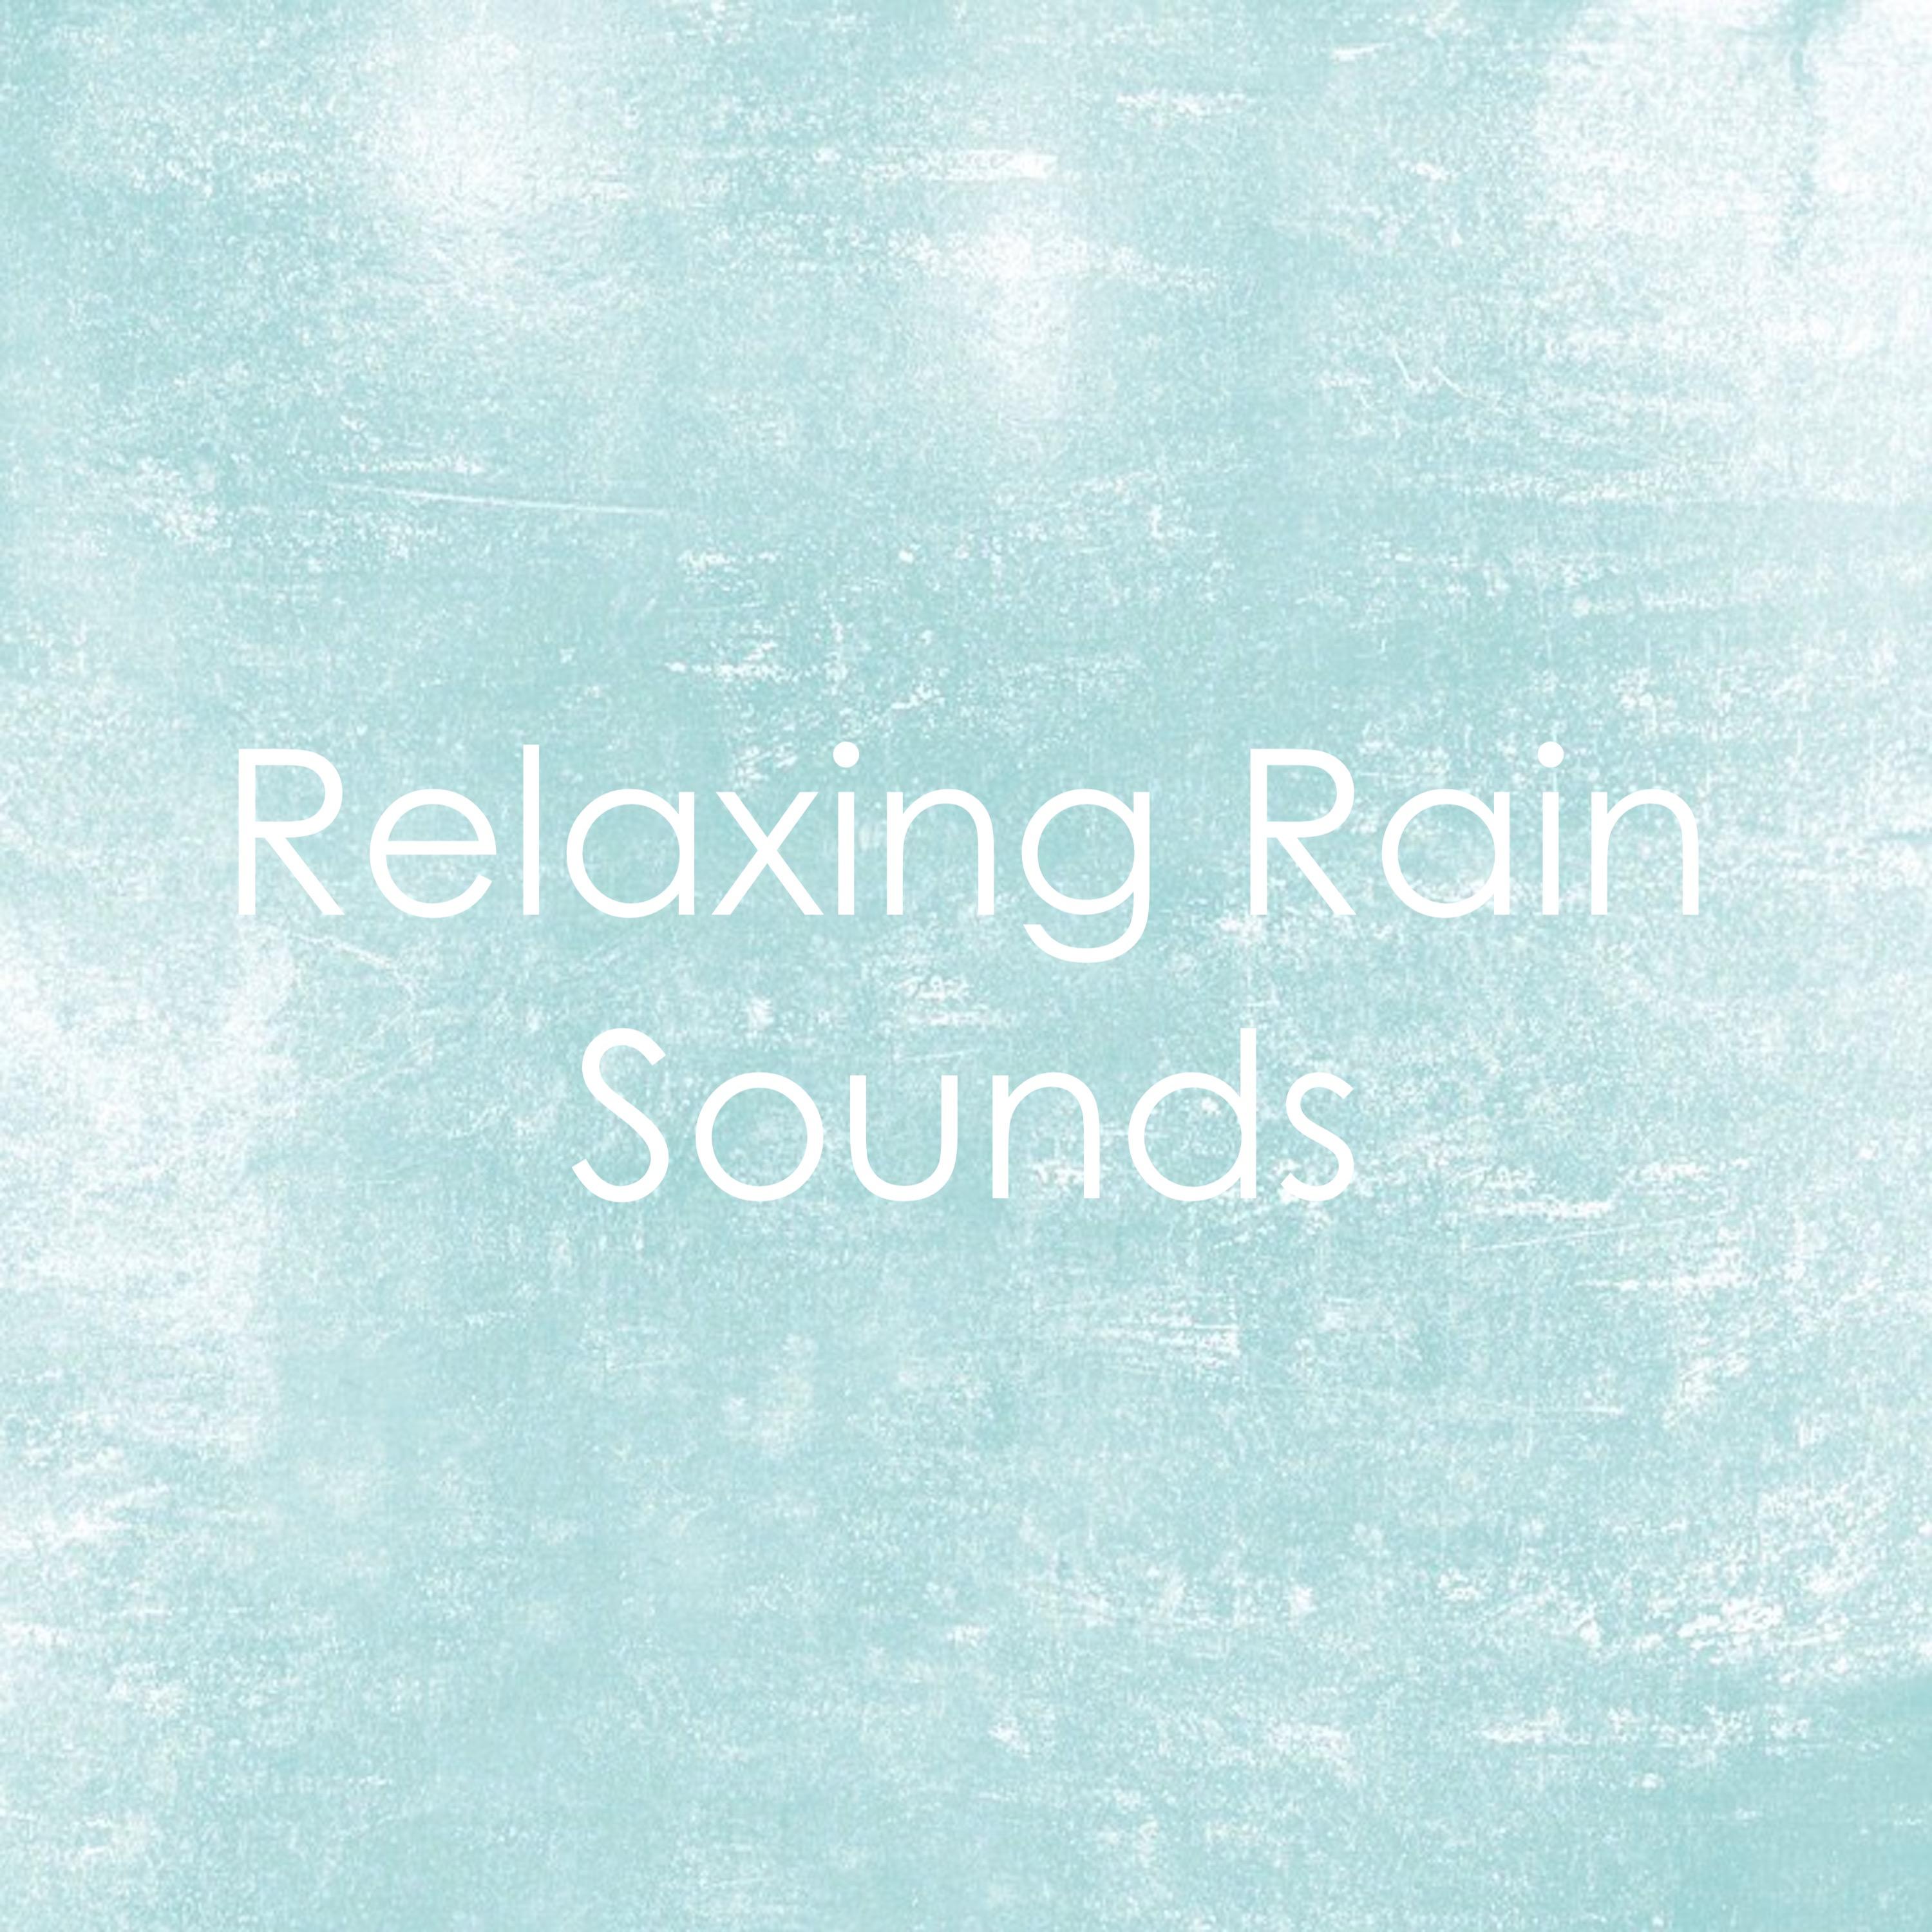 15 Sounds for Relaxation: Calming Rain